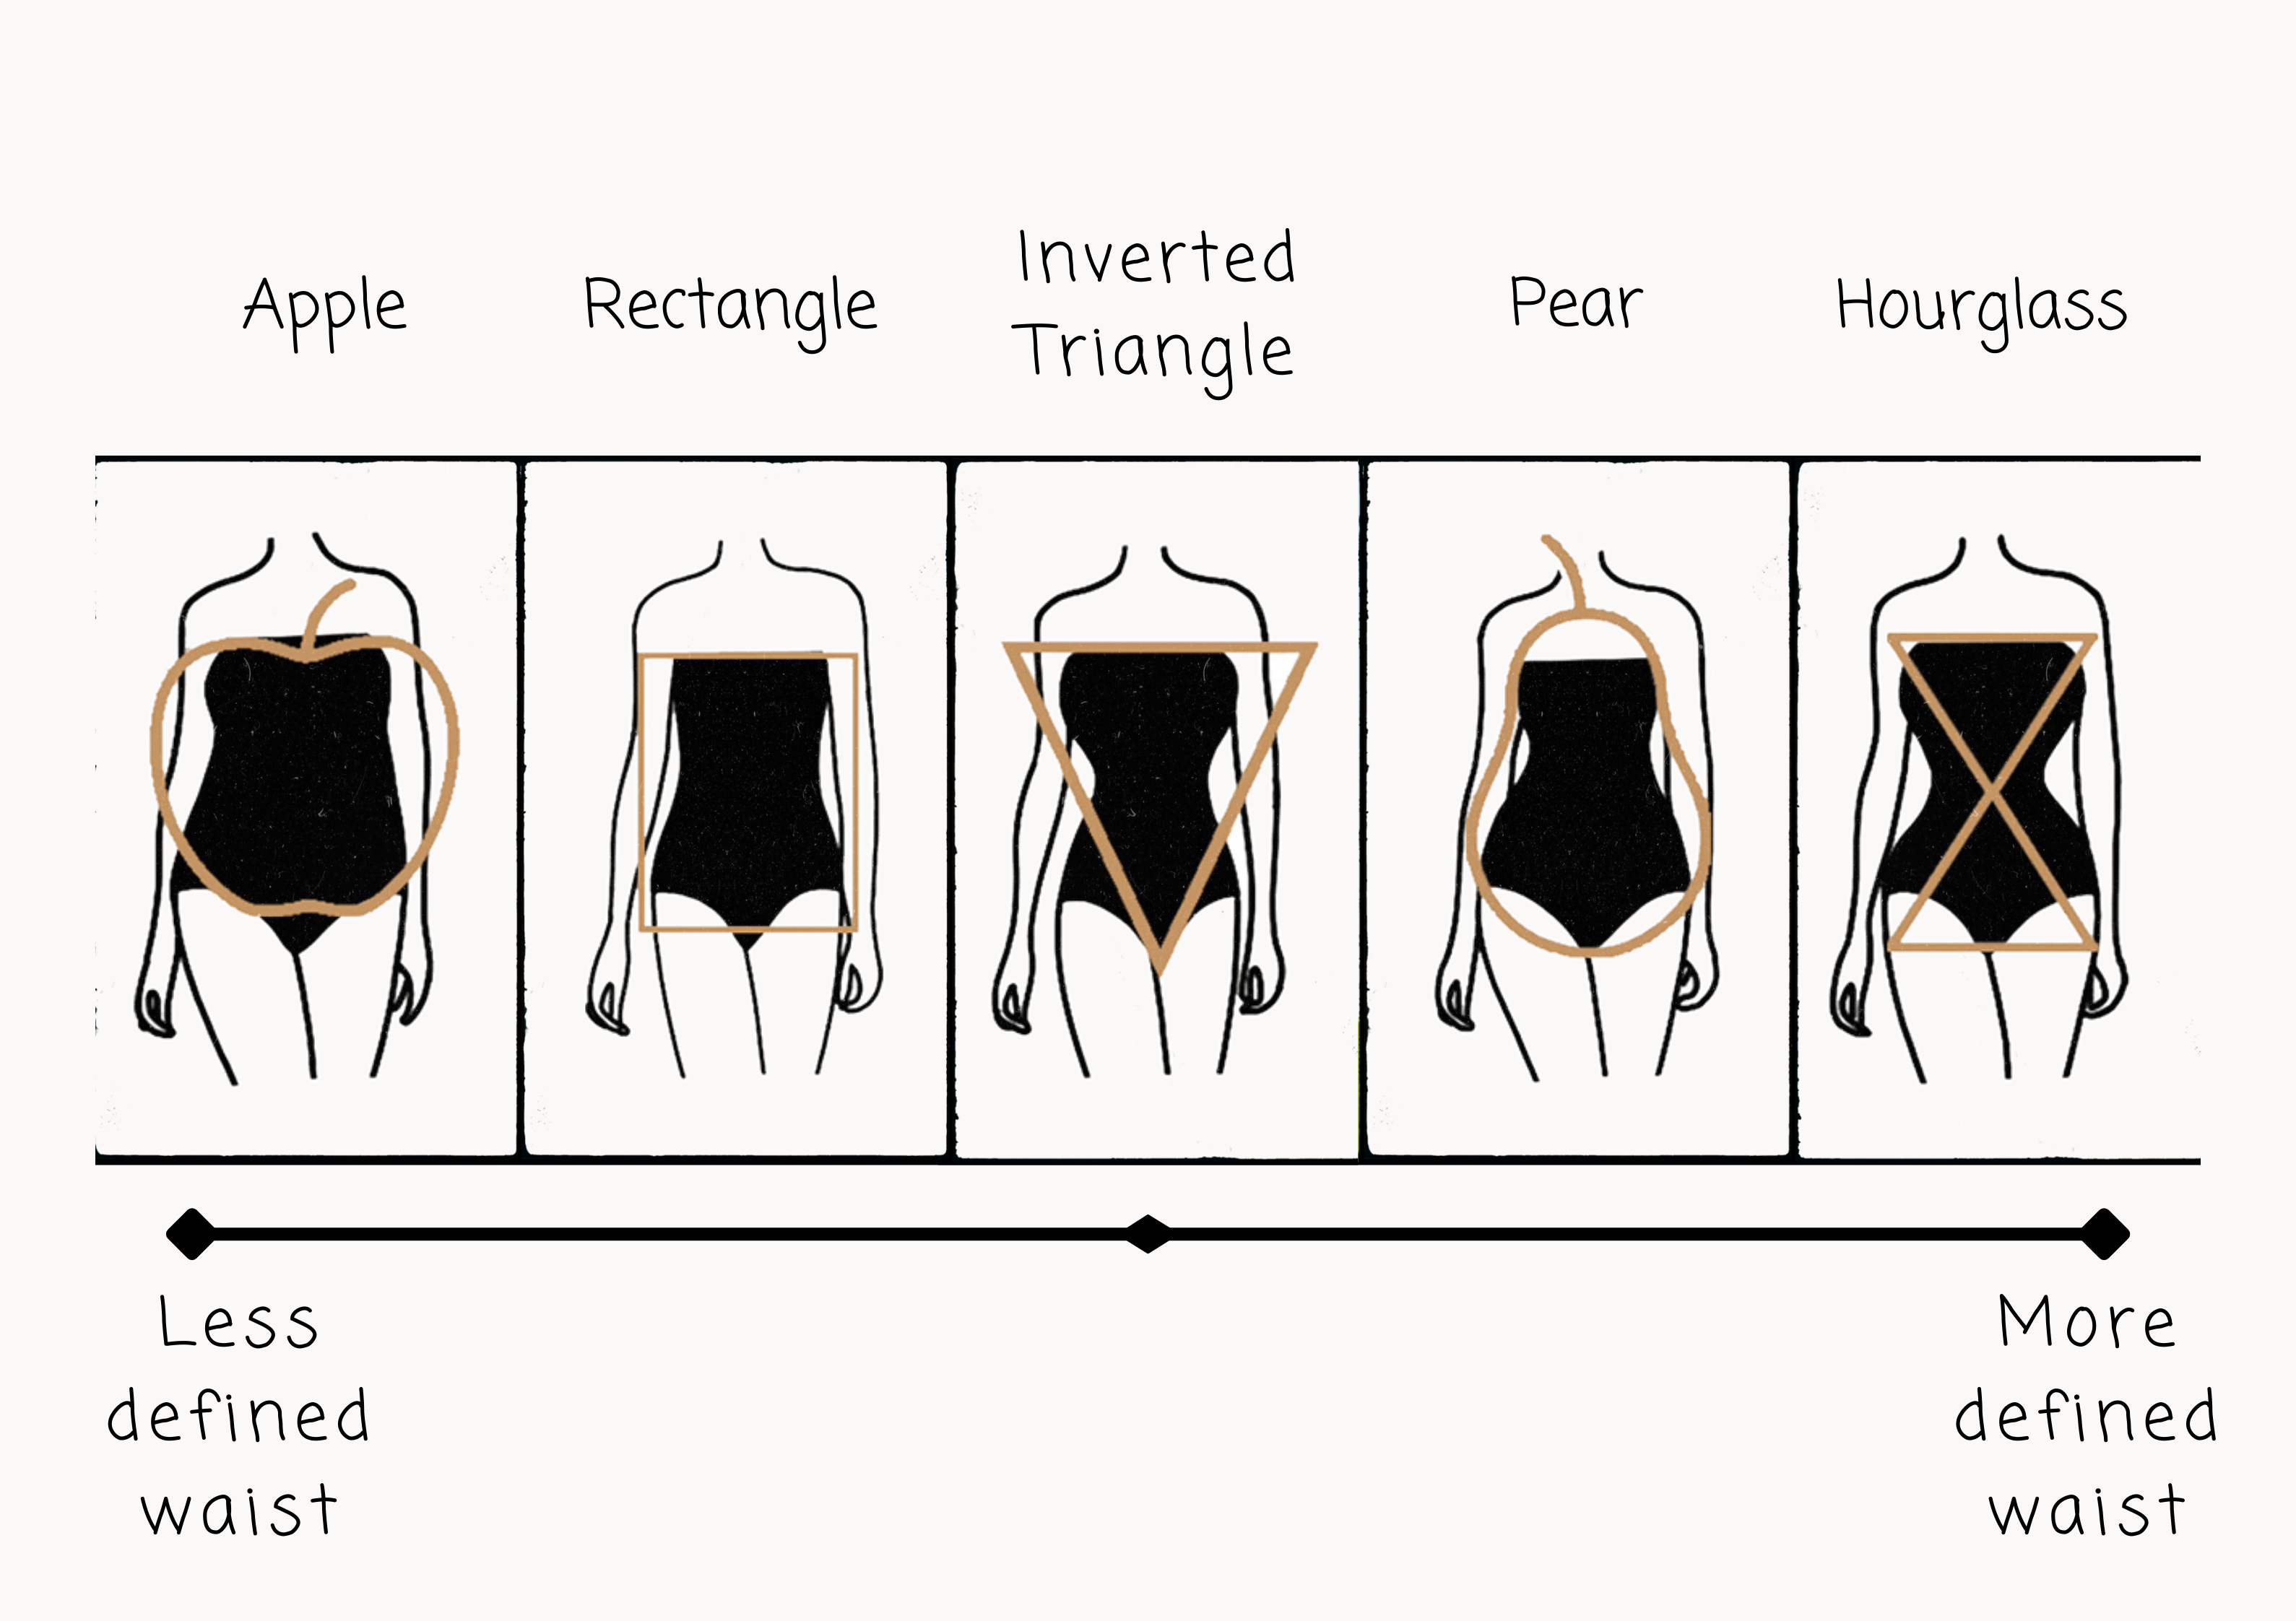 Inverted Triangle body Type- how to dress? - Inverted triangle shape